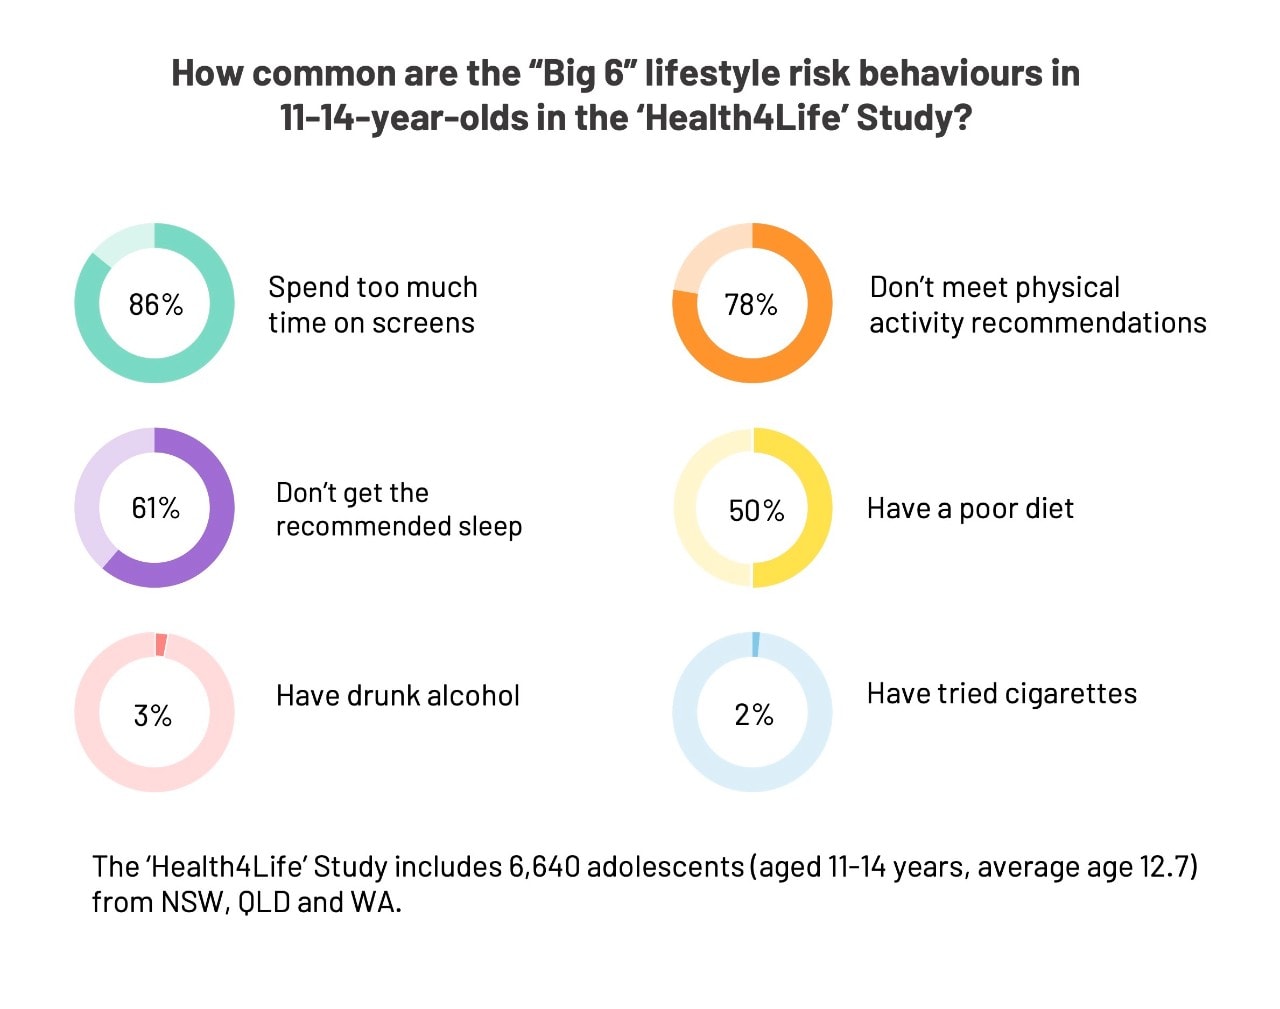 Figure showing how common the 'Big 6' lifestyle risk behvaviours are in 11-14 year-olds in the Health4Life Study